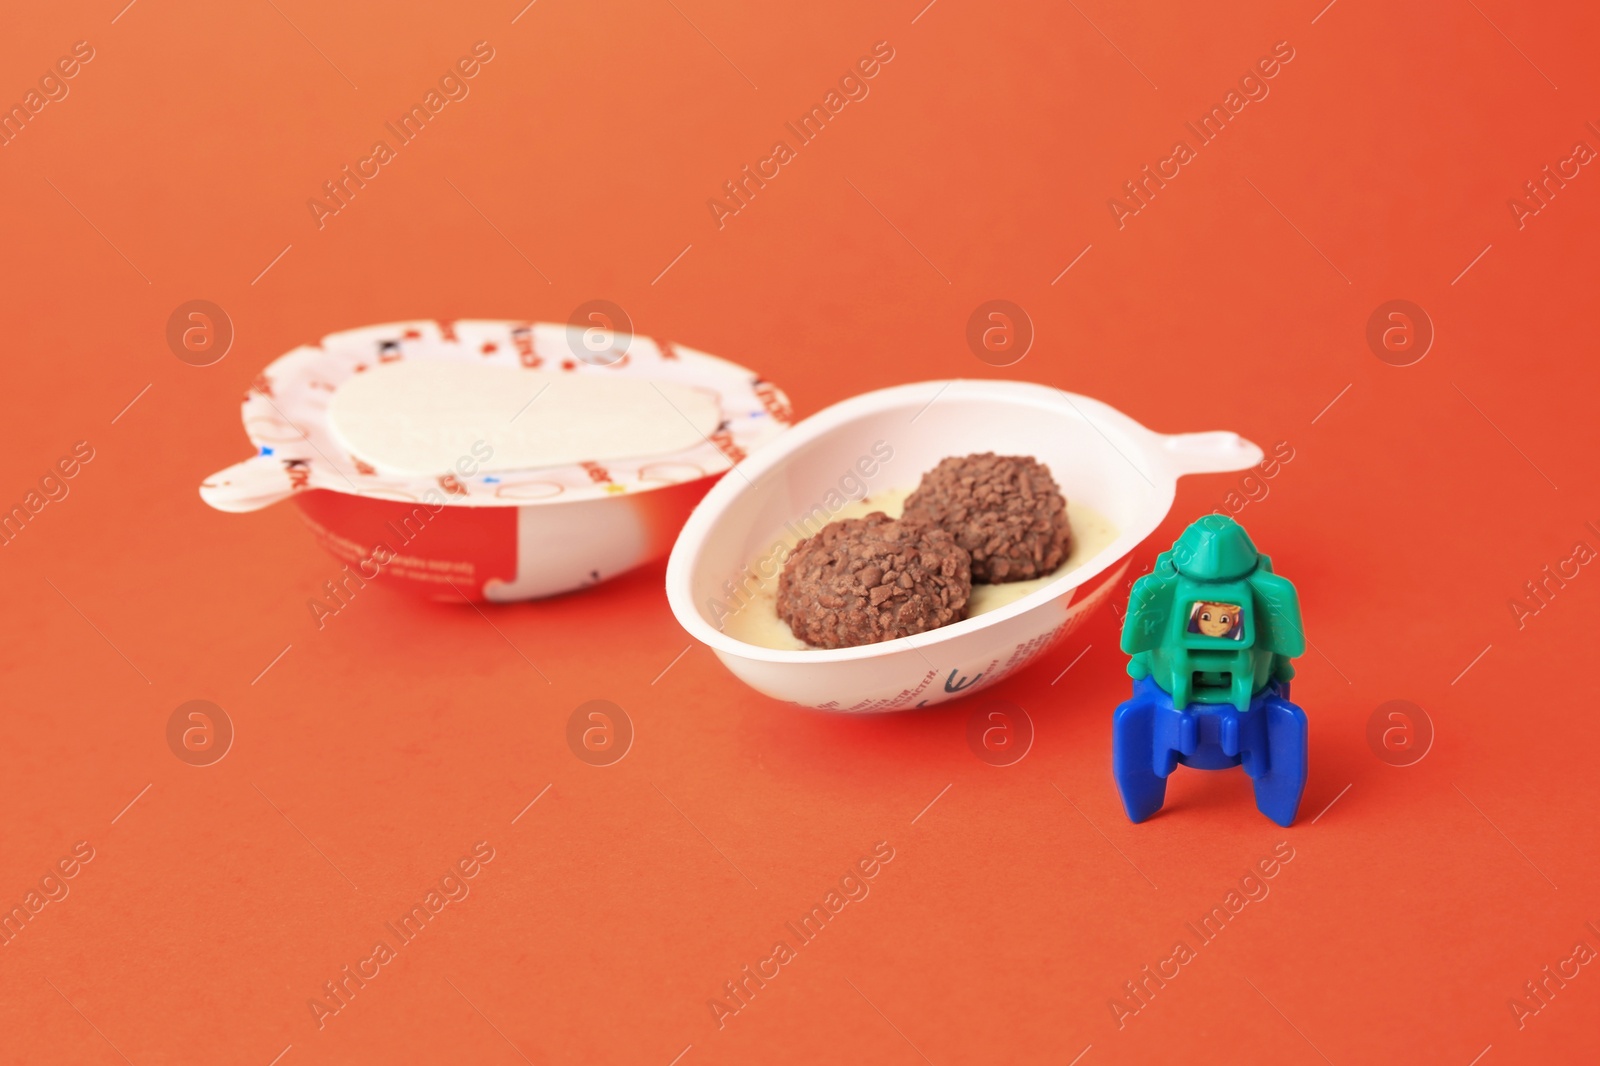 Photo of Slynchev Bryag, Bulgaria - May 25, 2023: Halves of Kinder Joy Egg with sweet candies and toy on orange background